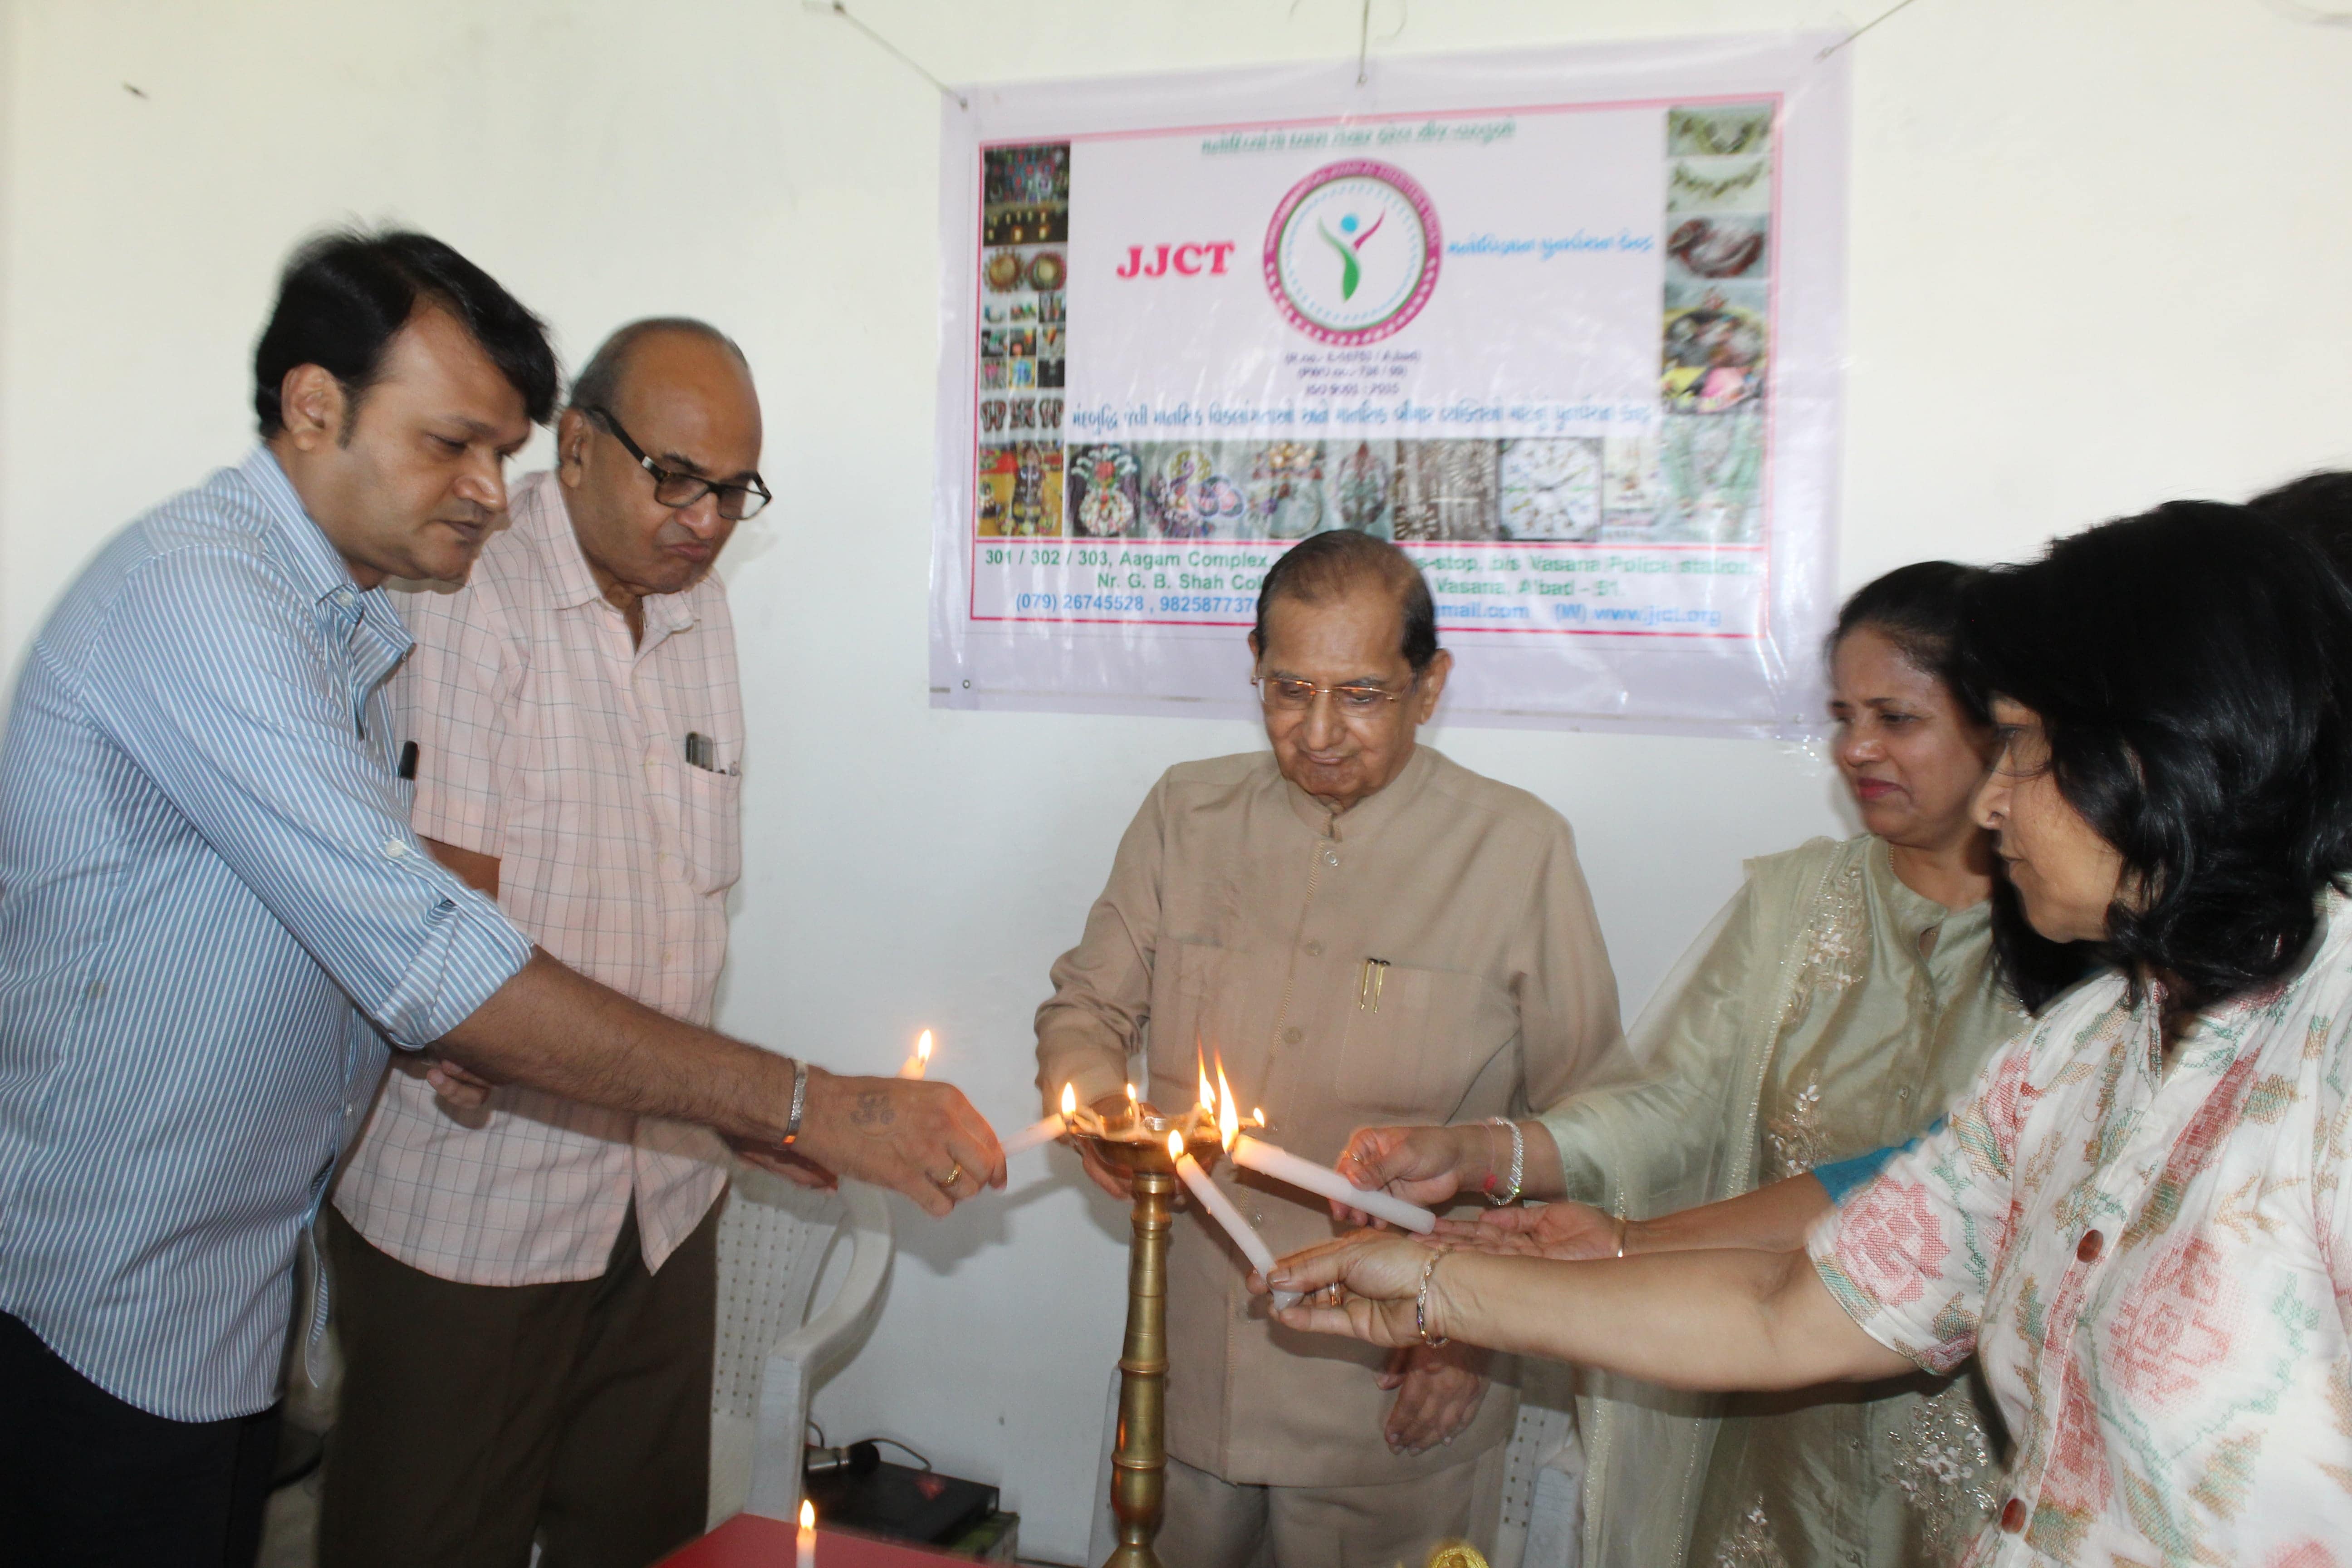 Skill development and OPD/therapy department-JJCT